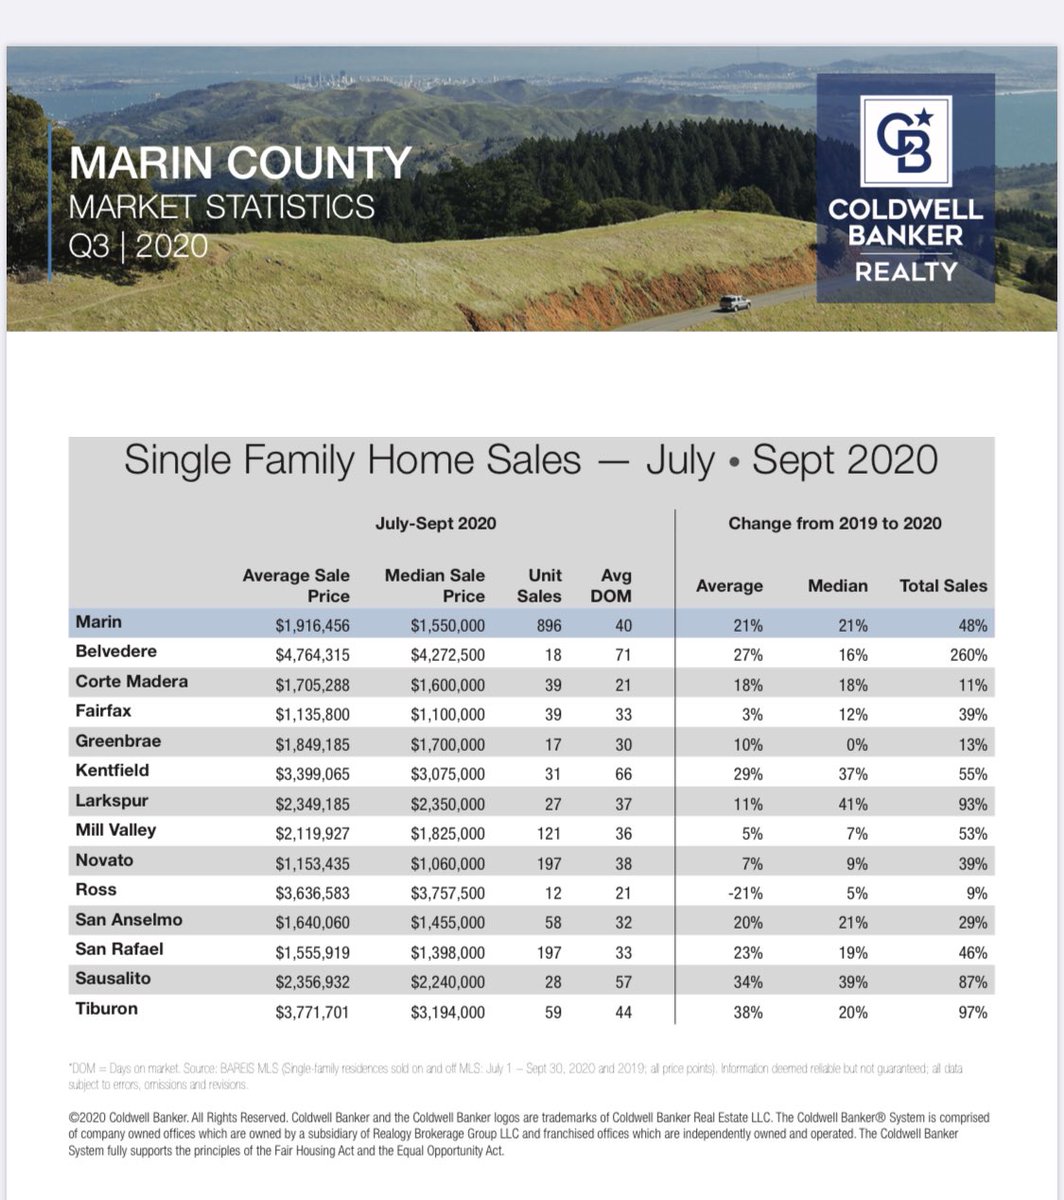 Marin County total number of sales for single family homes up 48% July-Sept from the same time in 2019. 🔥 #marinrealestate #marin #cbhomes